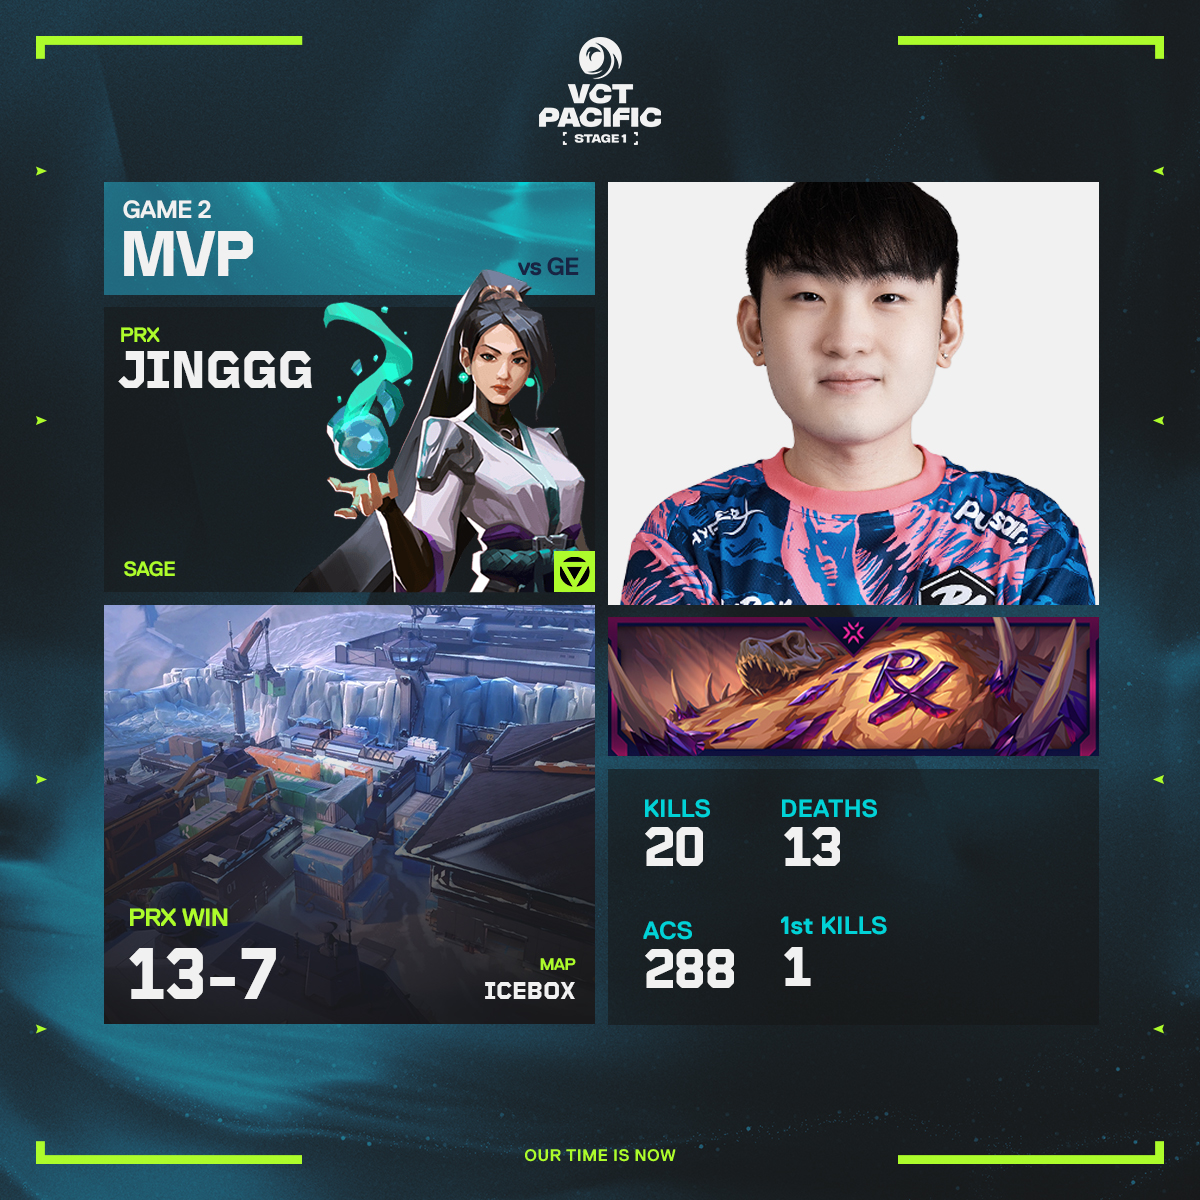 The better Battle Sage on Icebox tonight. @Jingggxd is the Map 2 MVP! #VCTPacific